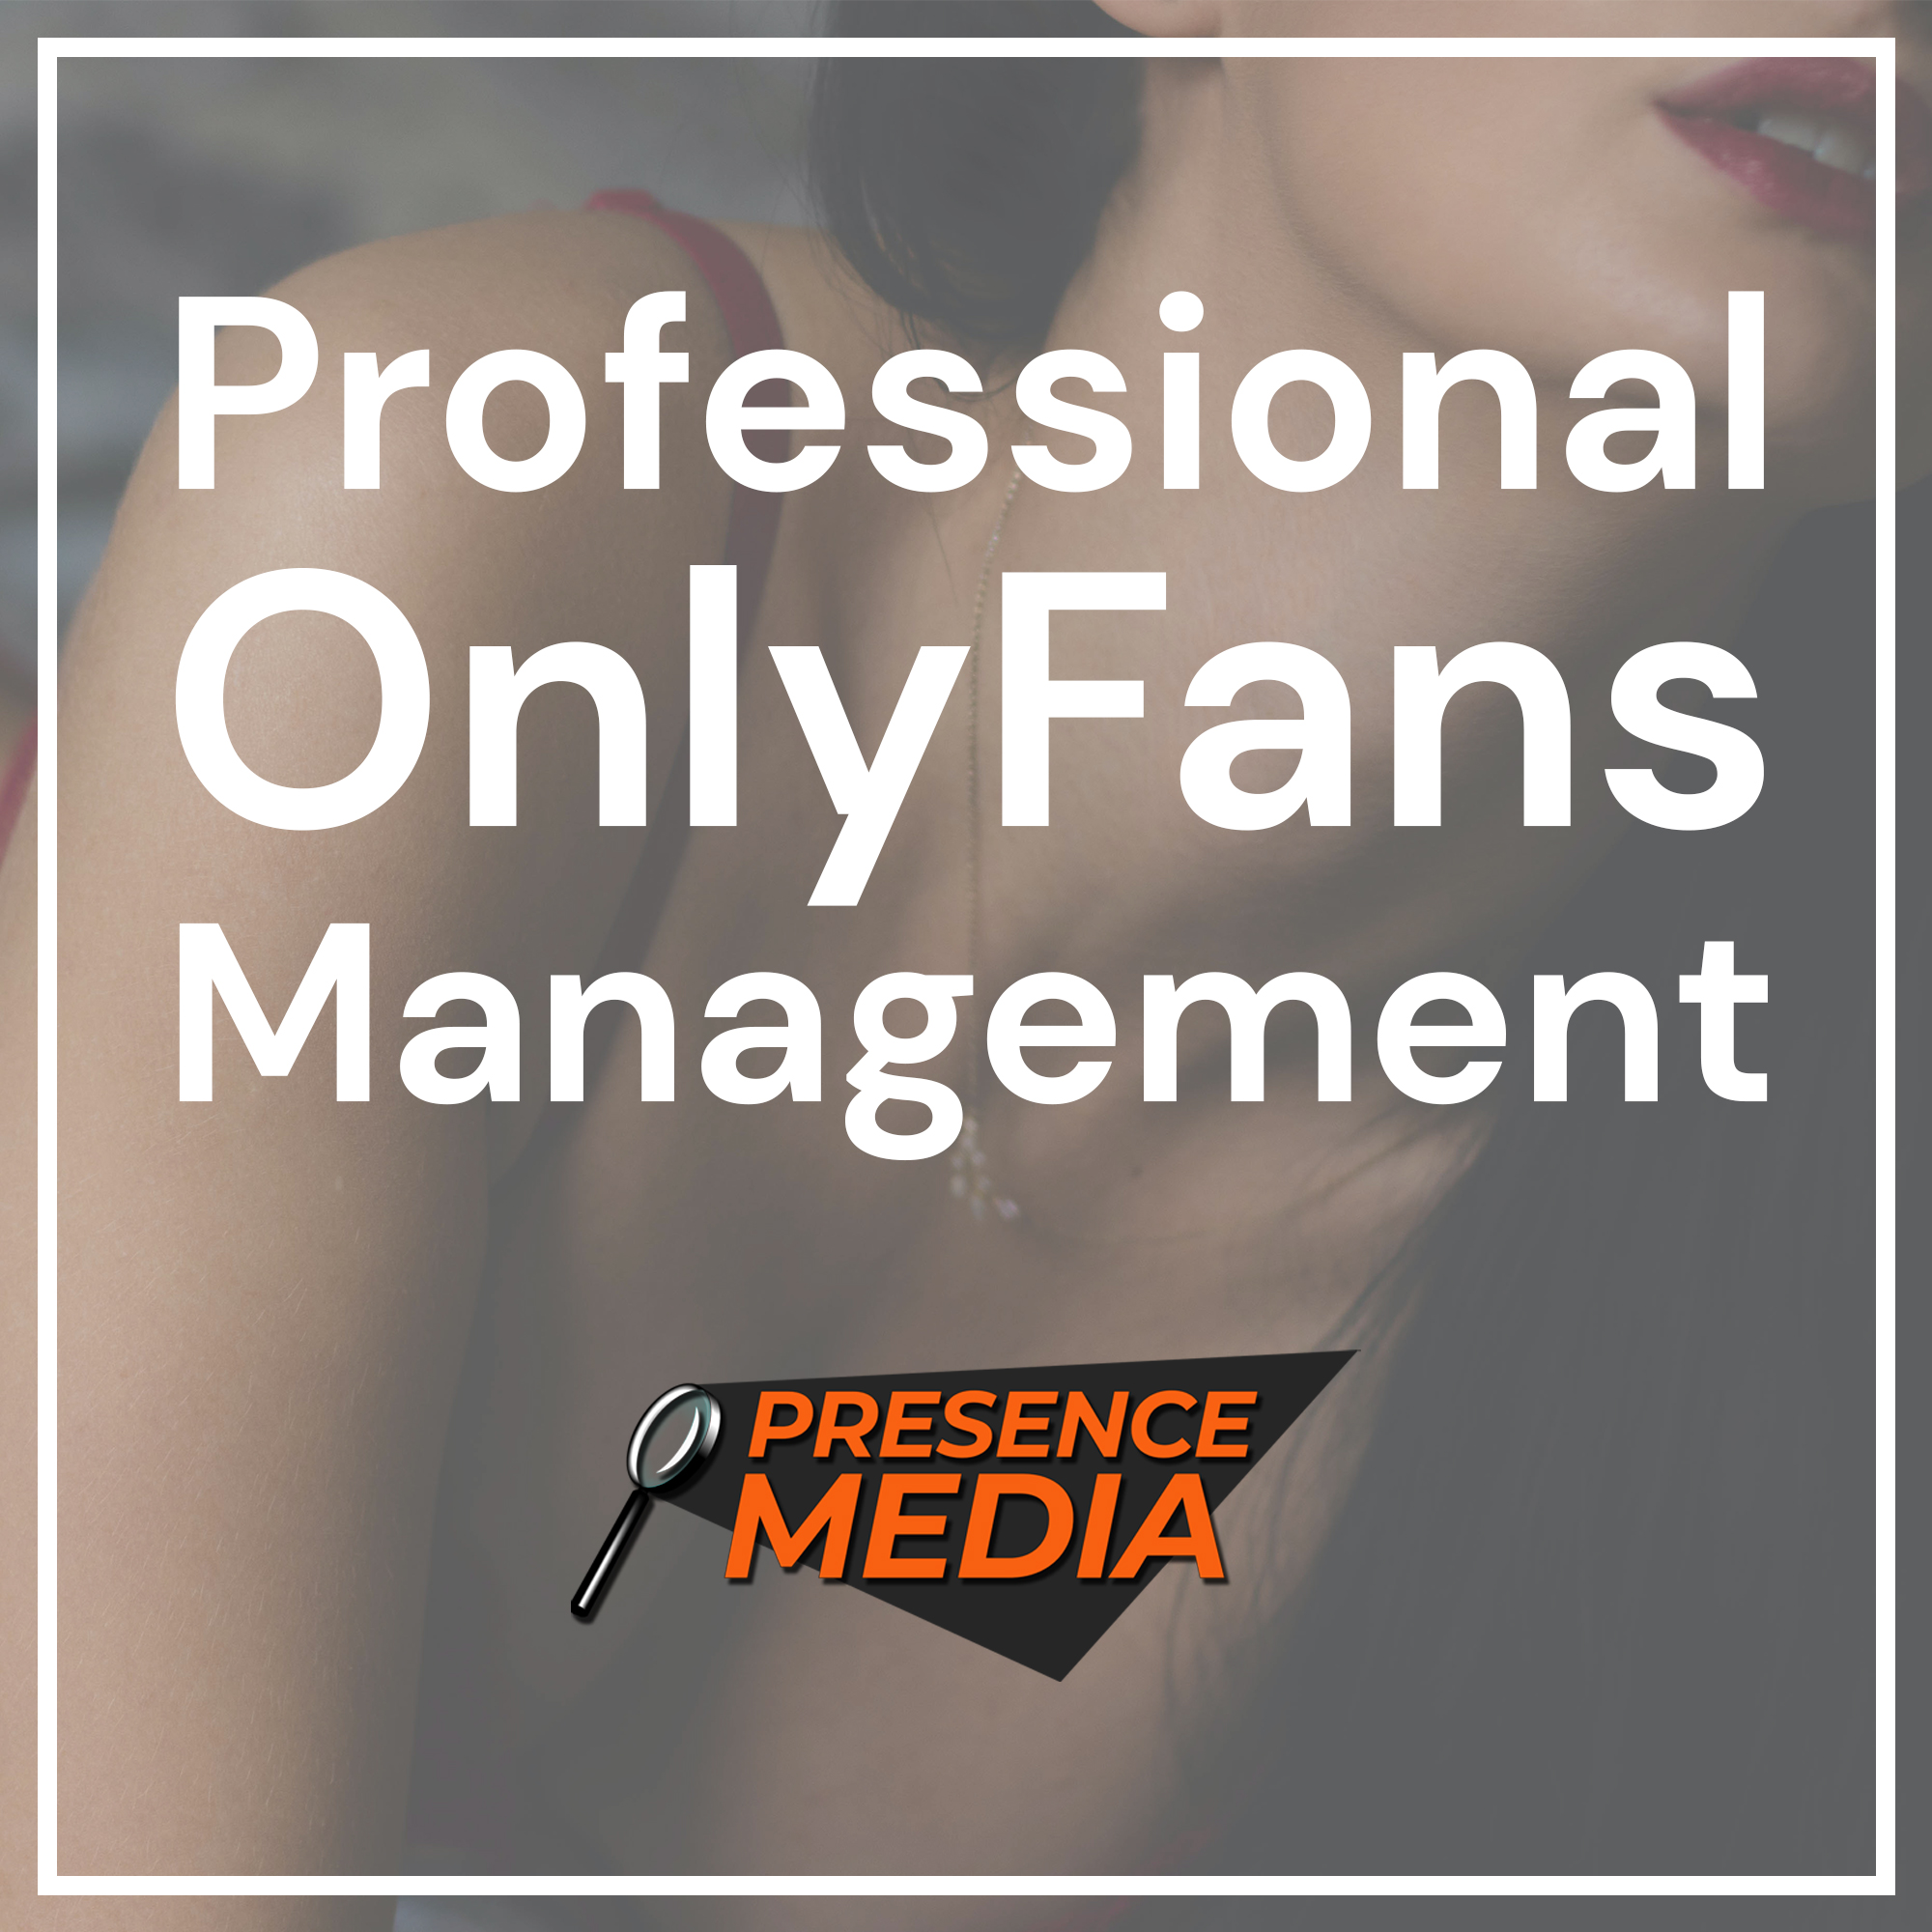 How to become an onlyfans manager